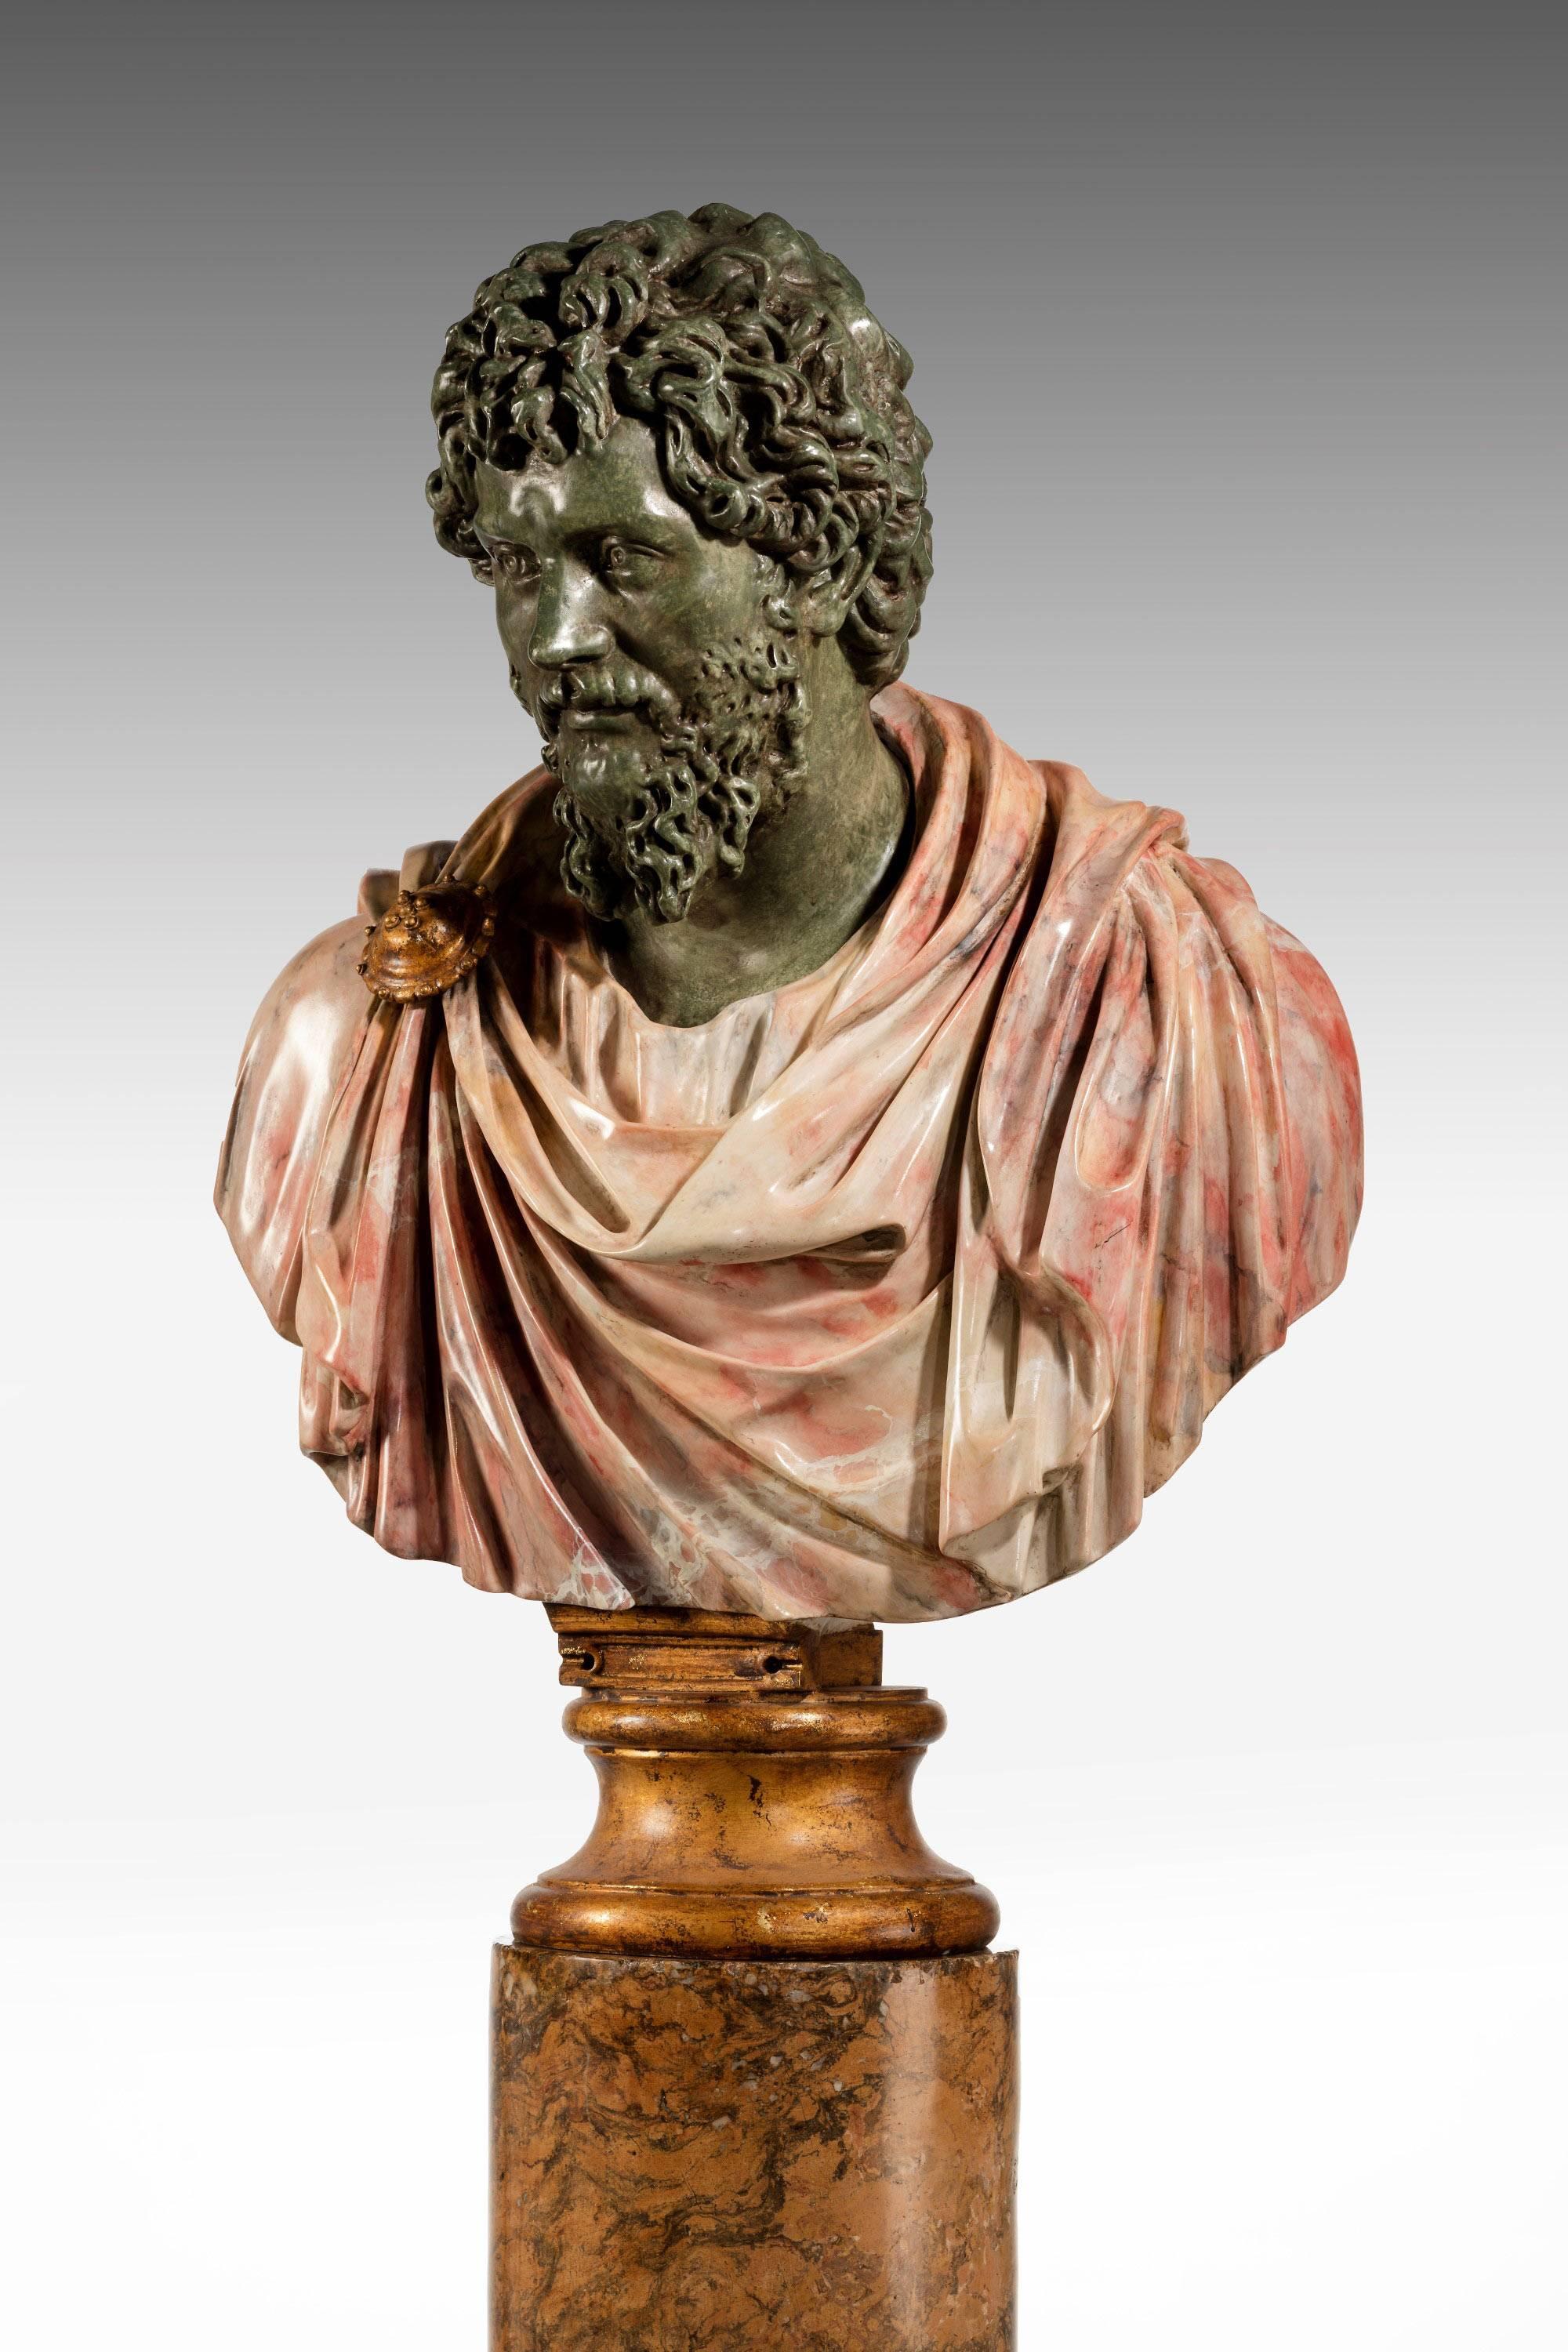 A copy of a Roman Emperor Septimus Severus (193 BC-211 BC).

Sold without pedestal.

Septimius Severus 11 April 145–4 February 211, also known as Severus, was Roman emperor from 193 to 211. Severus was born in Leptis Magna in the Roman province